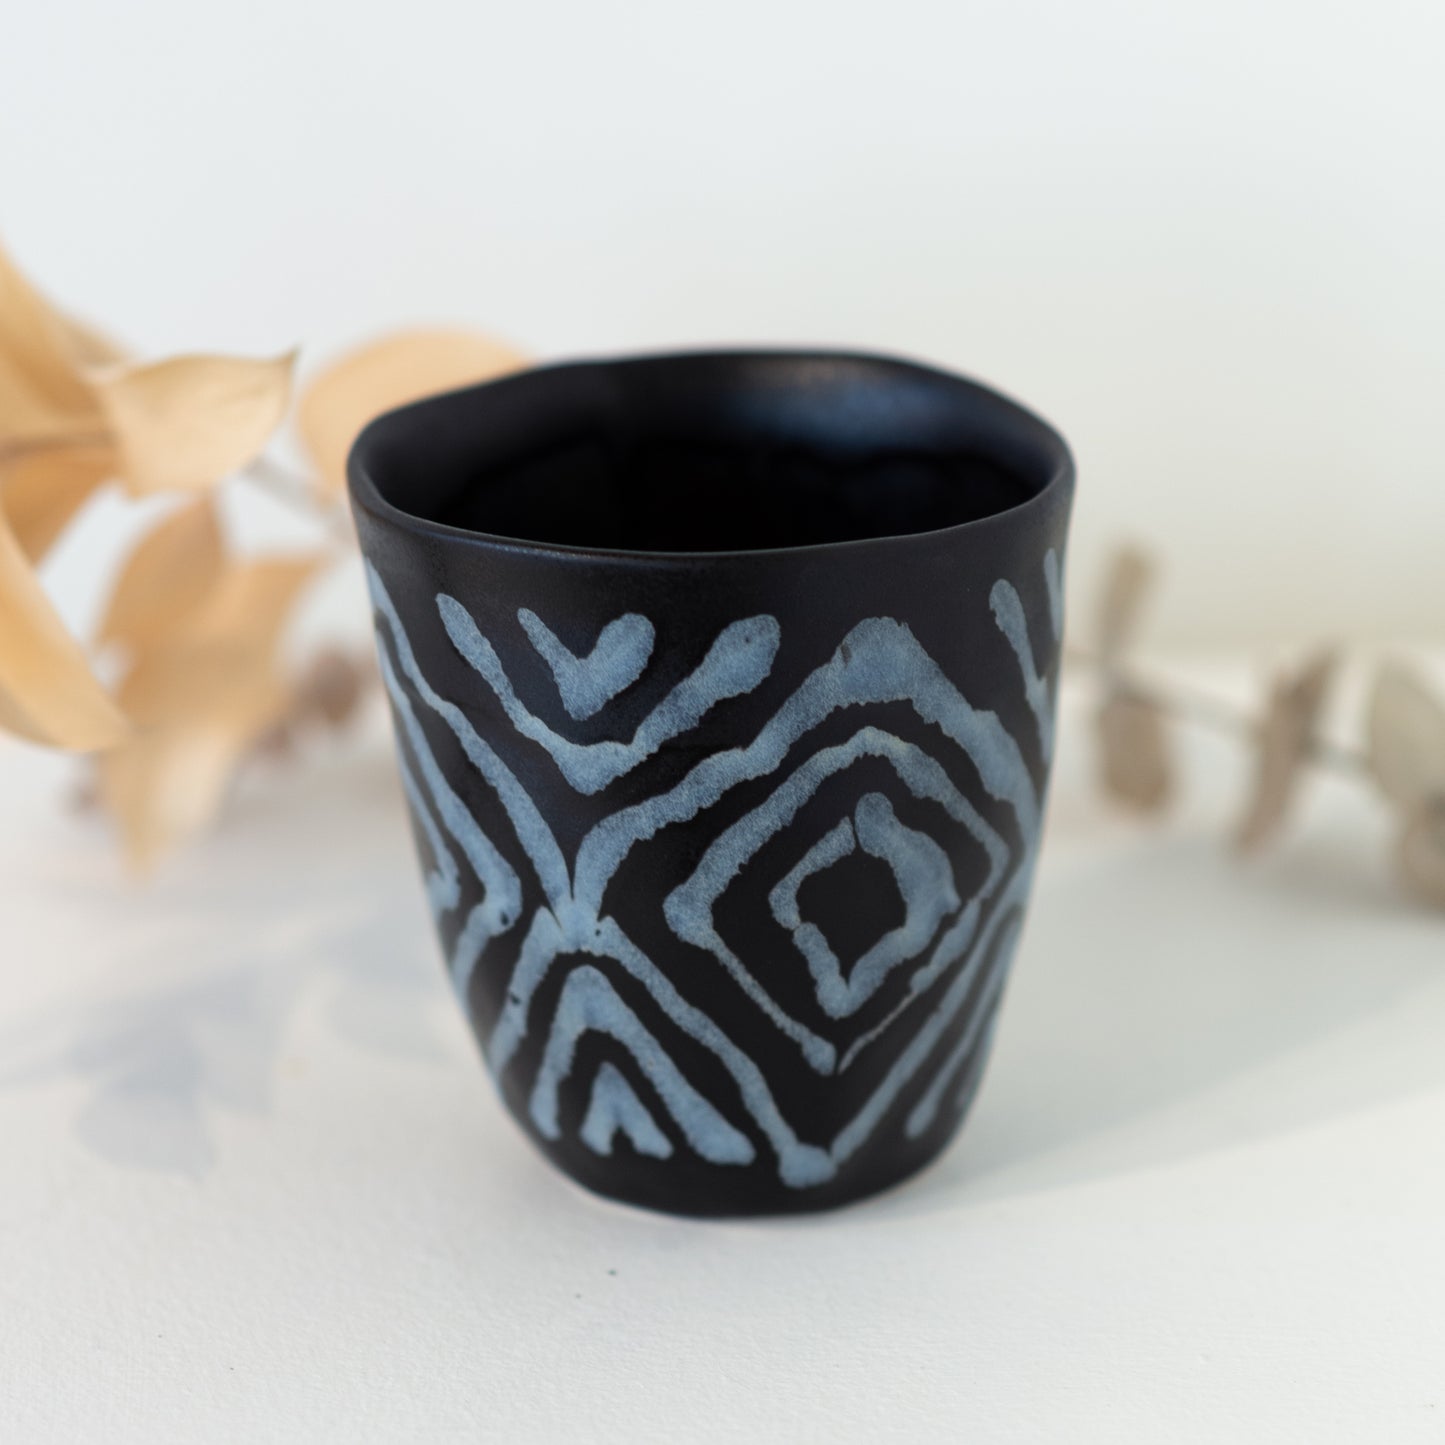 Black cup with grey/white diamond patterning.